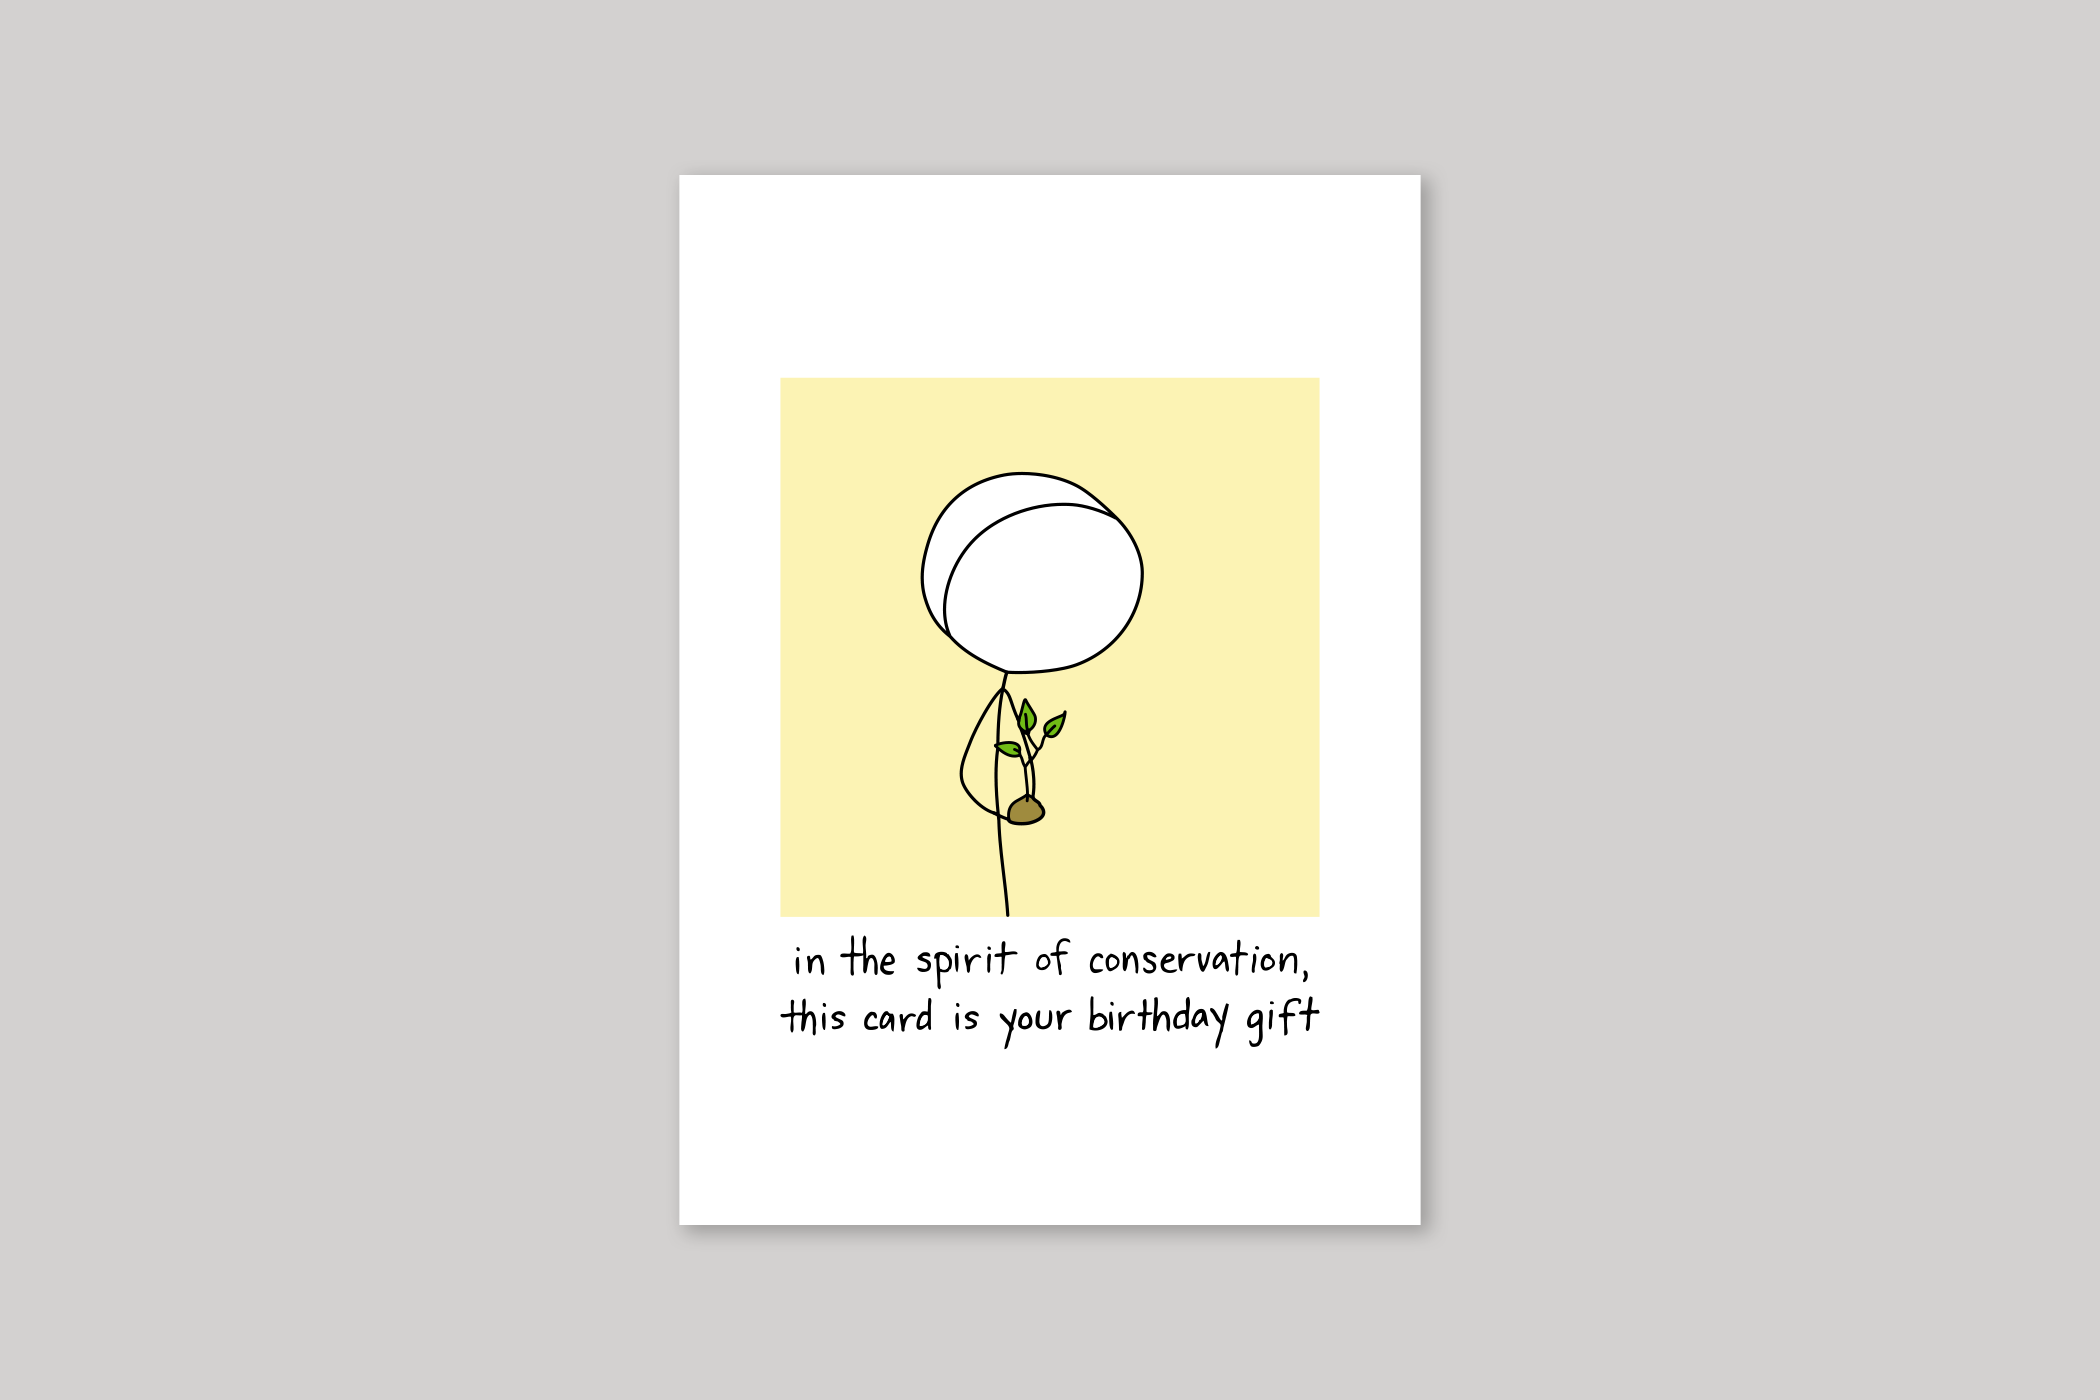 Spirit of Conservation humorous illustration from Mean Cards range of greeting cards by Icon.